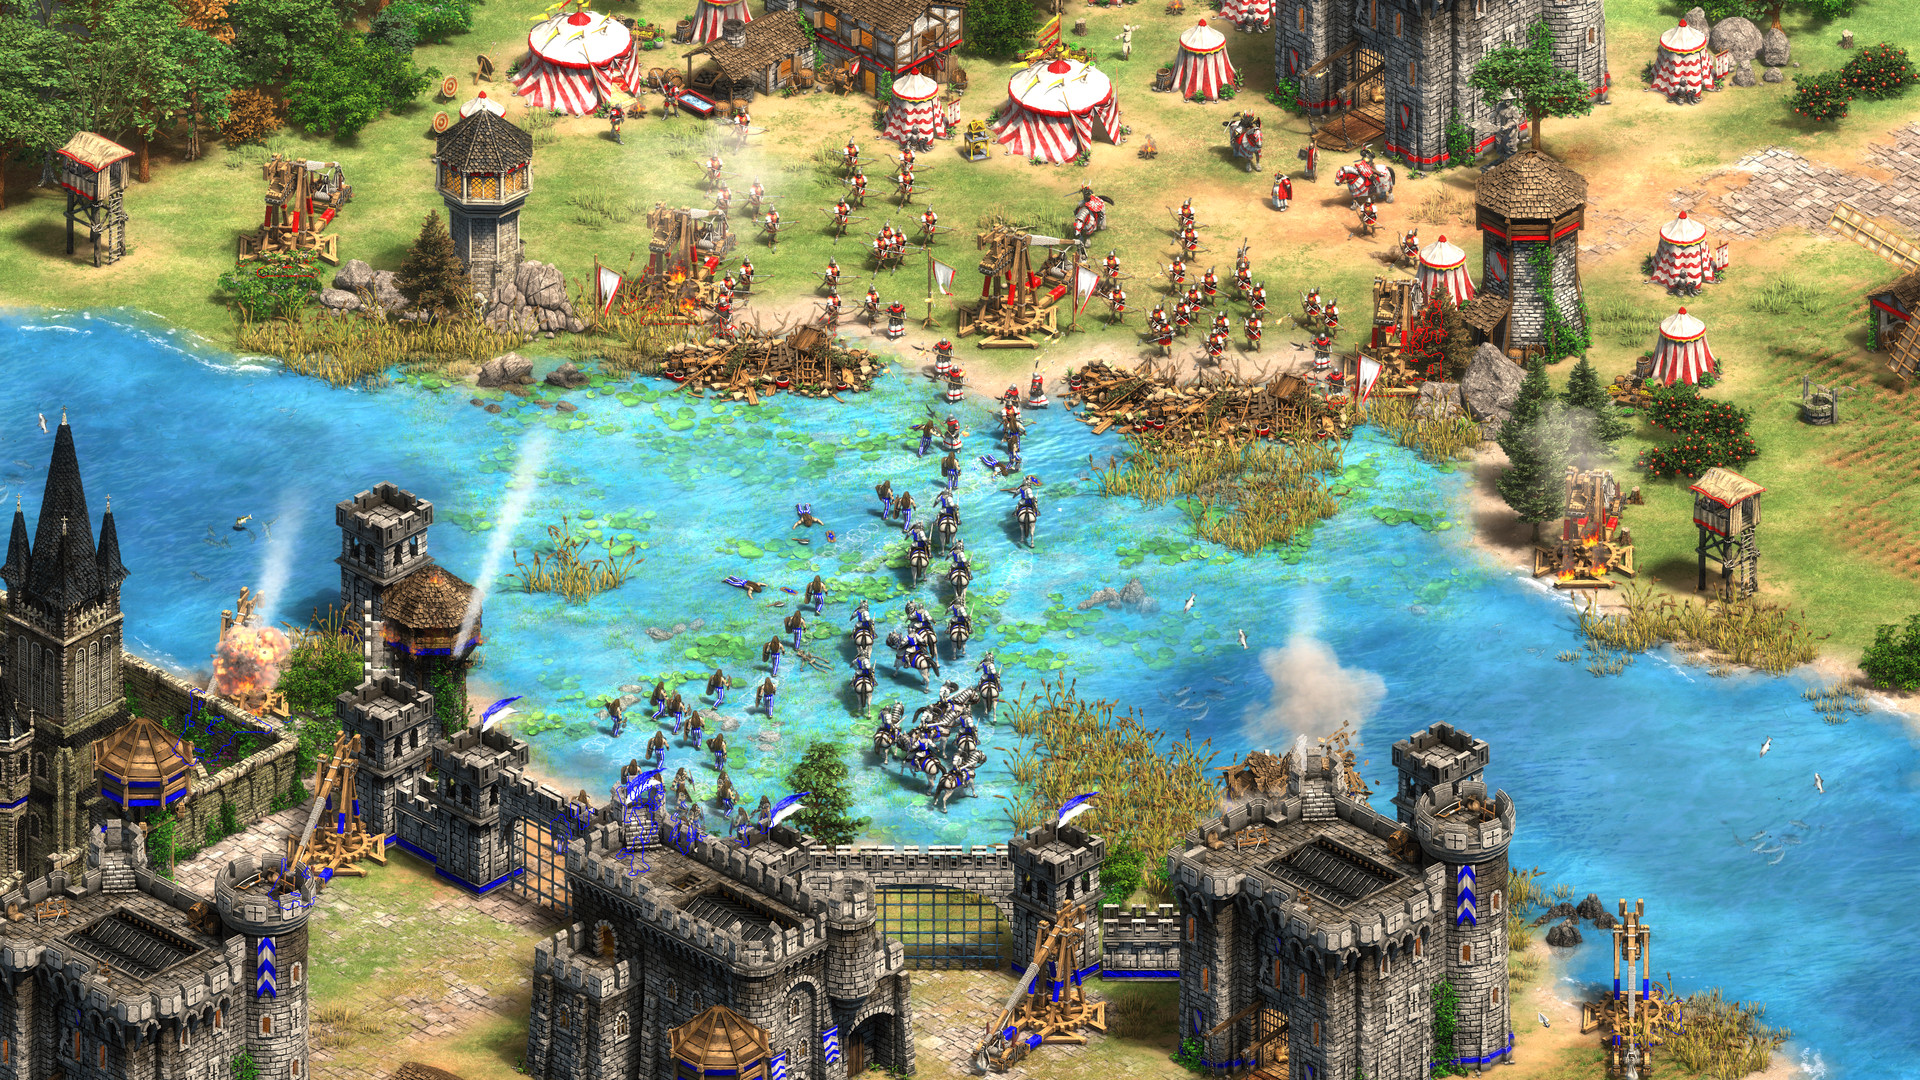 Age of Empires (@AgeOfEmpires) / Twitter